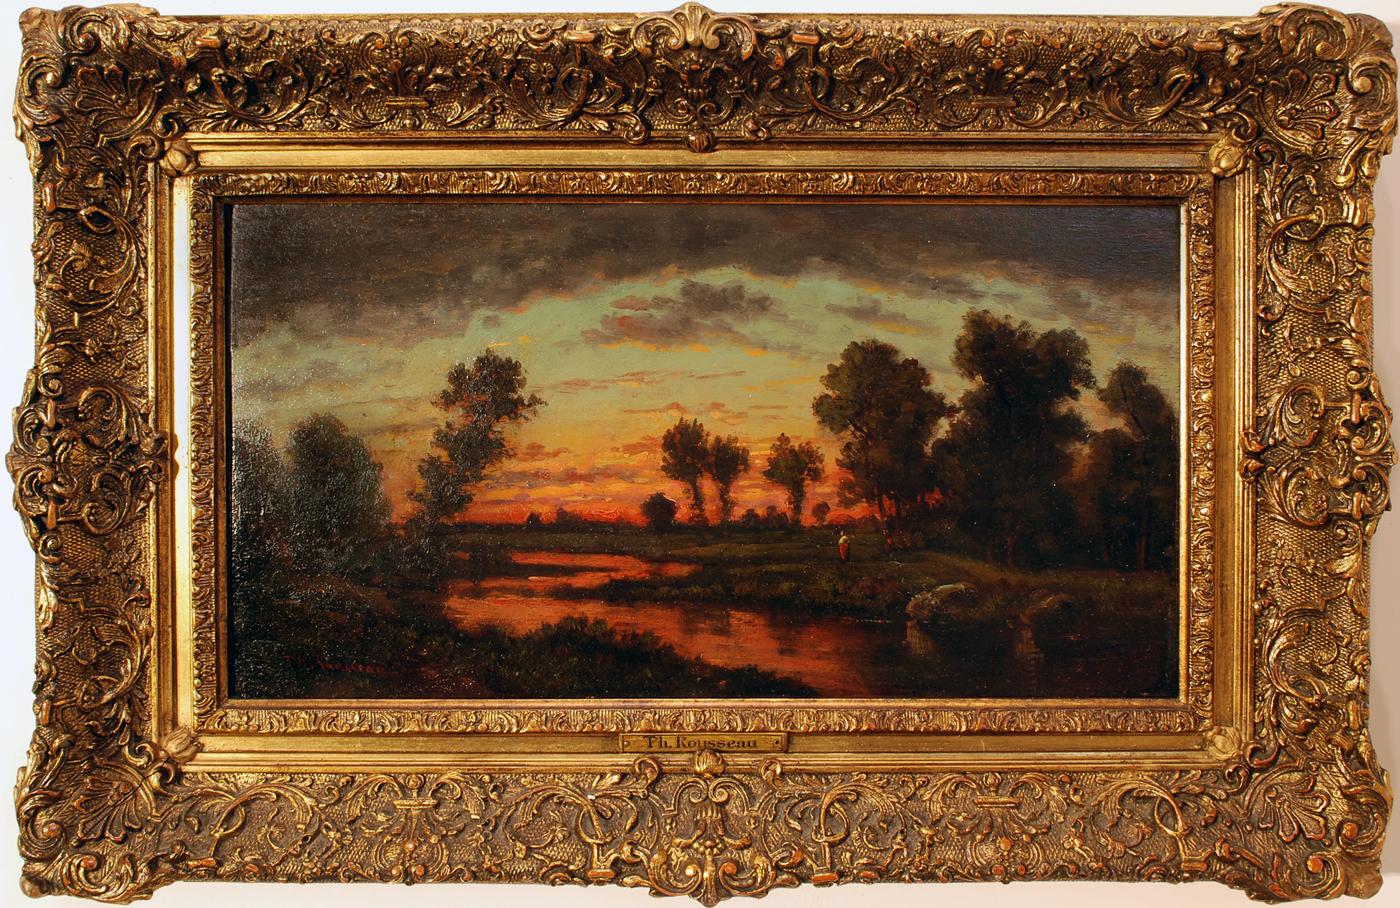 Soleil Couchant - Painting by Théodore Rousseau